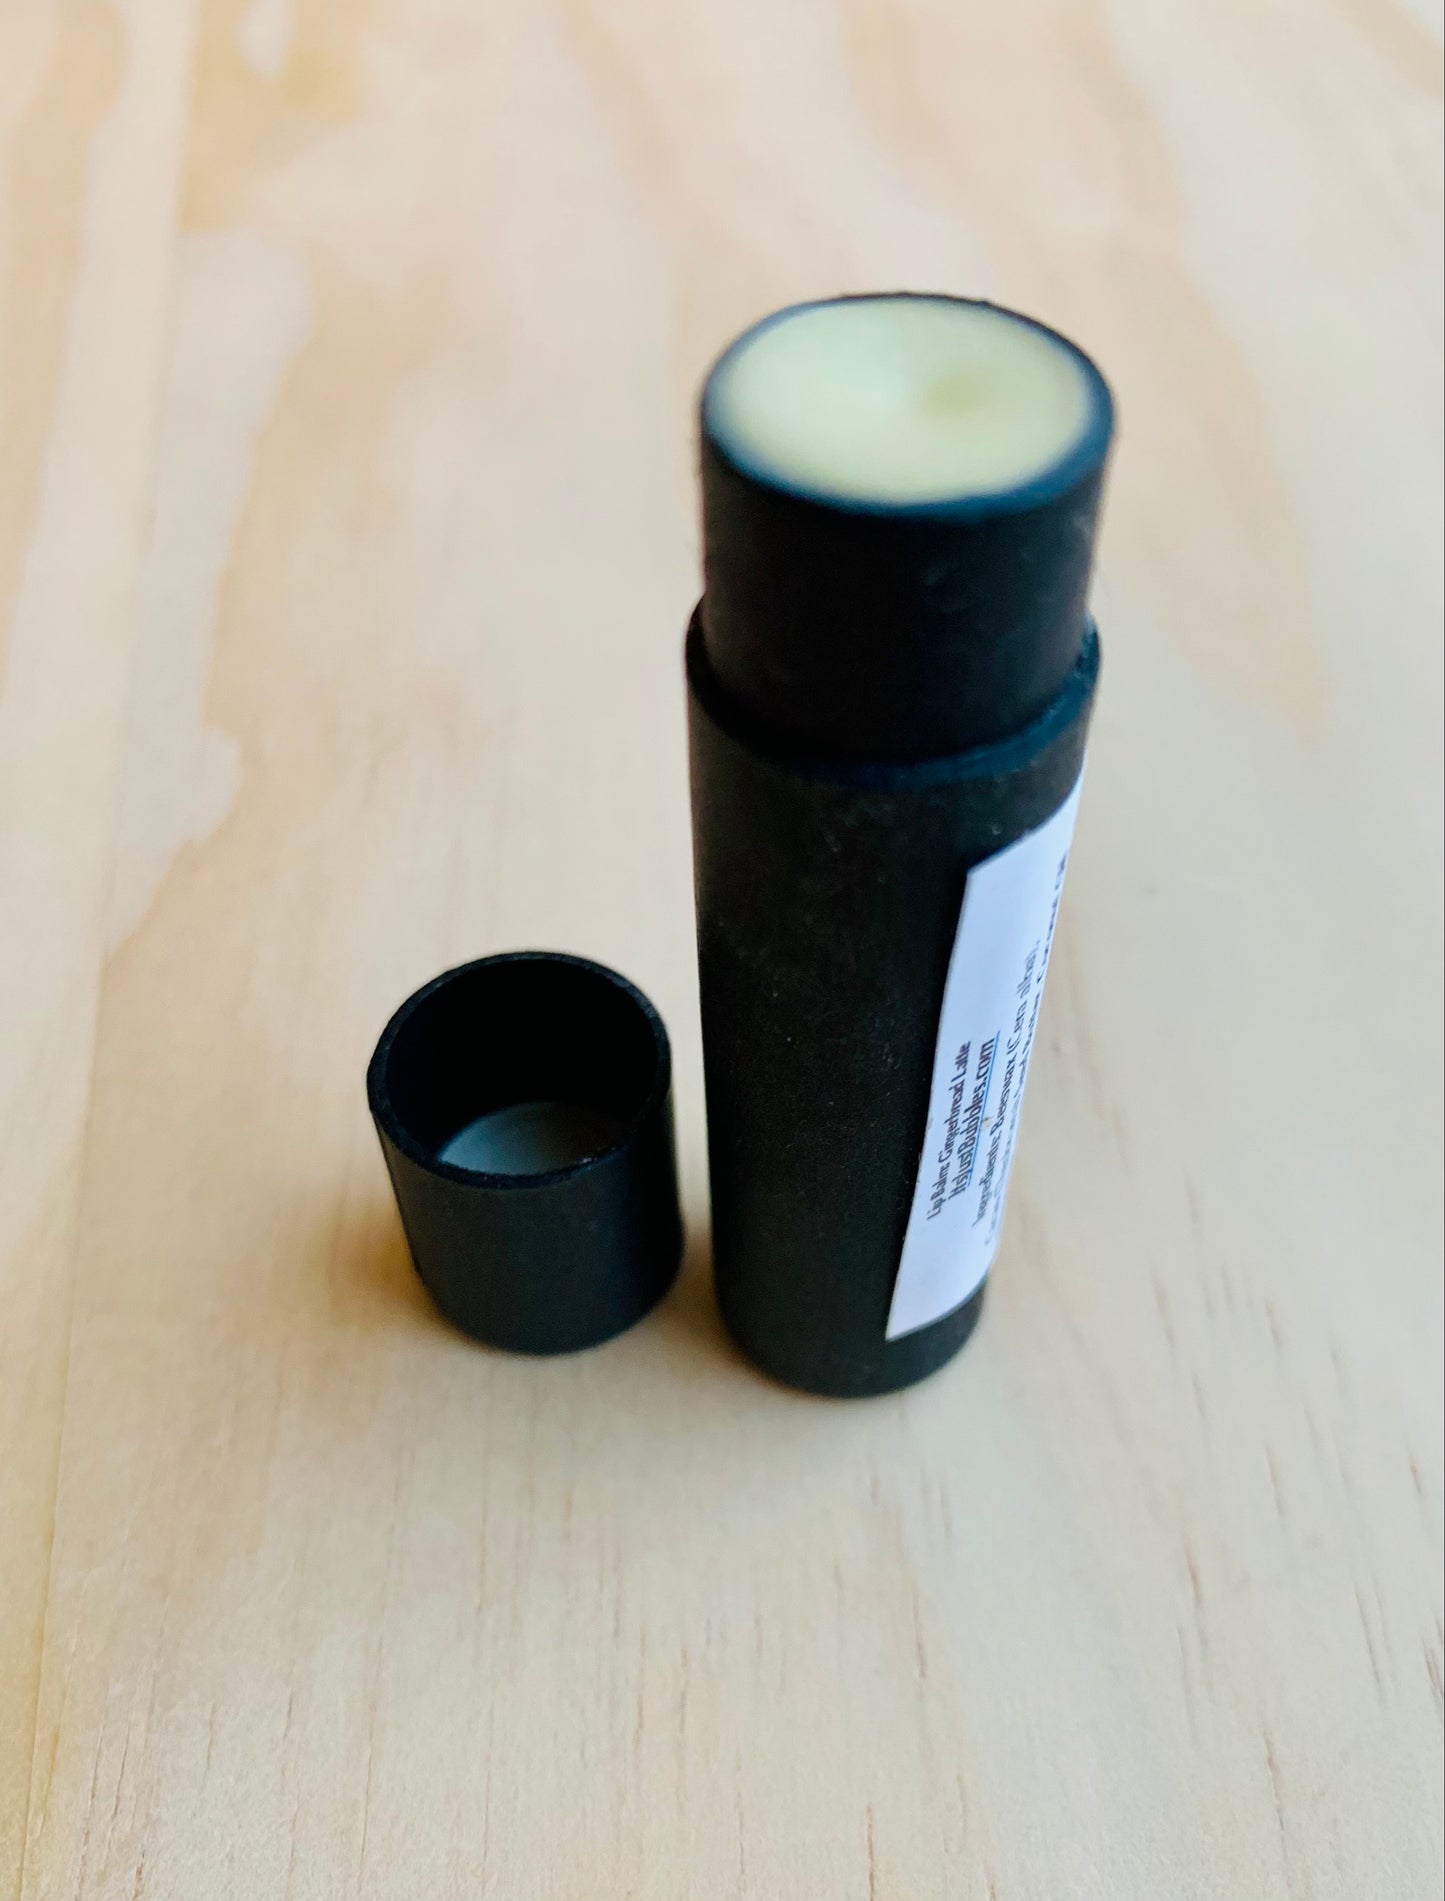 Lip Balm - Eco-Friendly, Hydrating, and Delicious